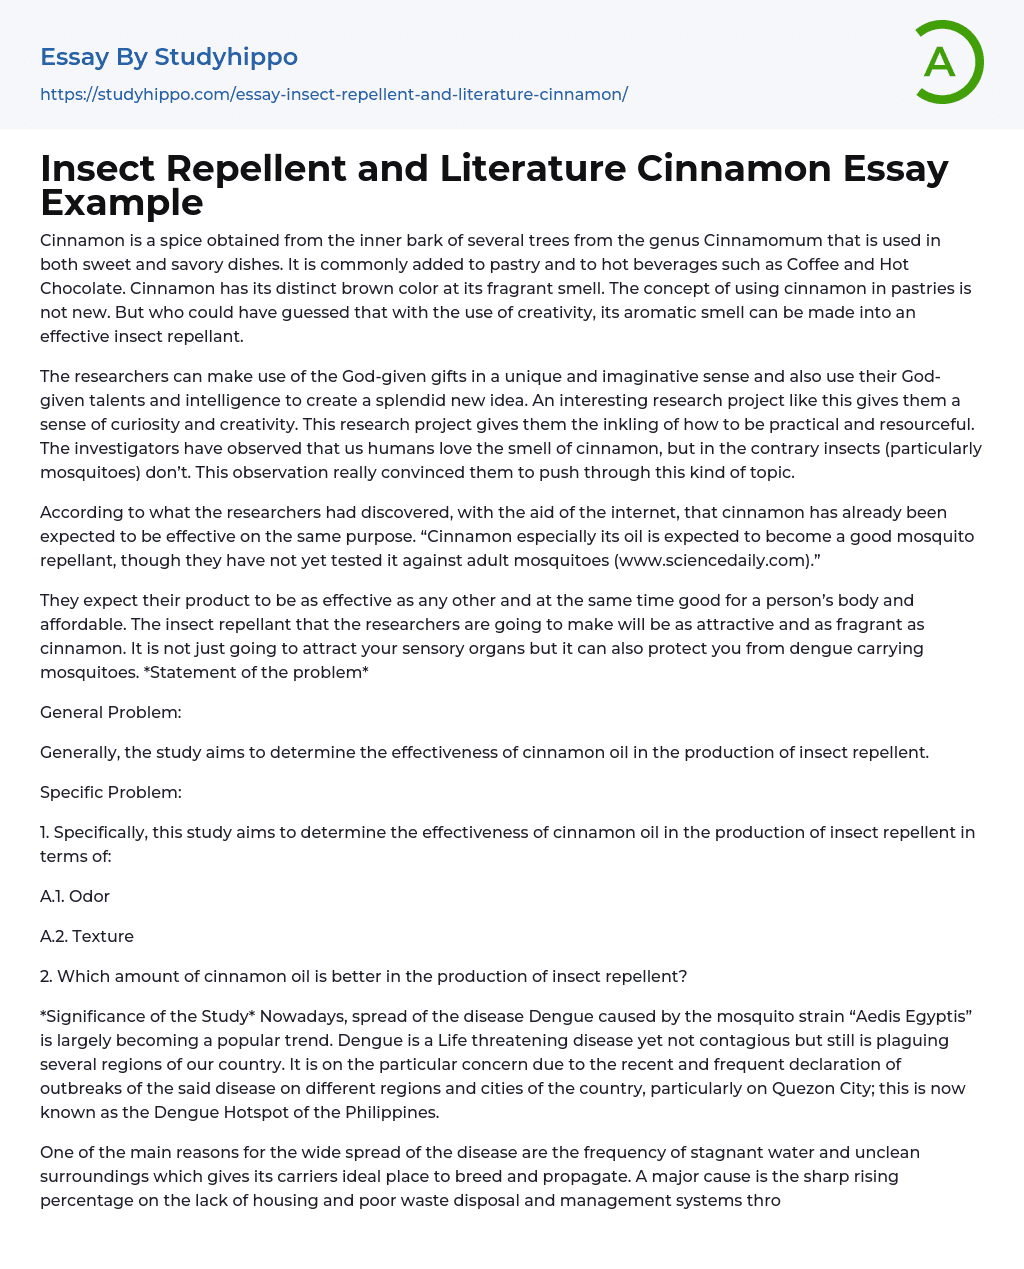 Insect Repellent and Literature Cinnamon Essay Example